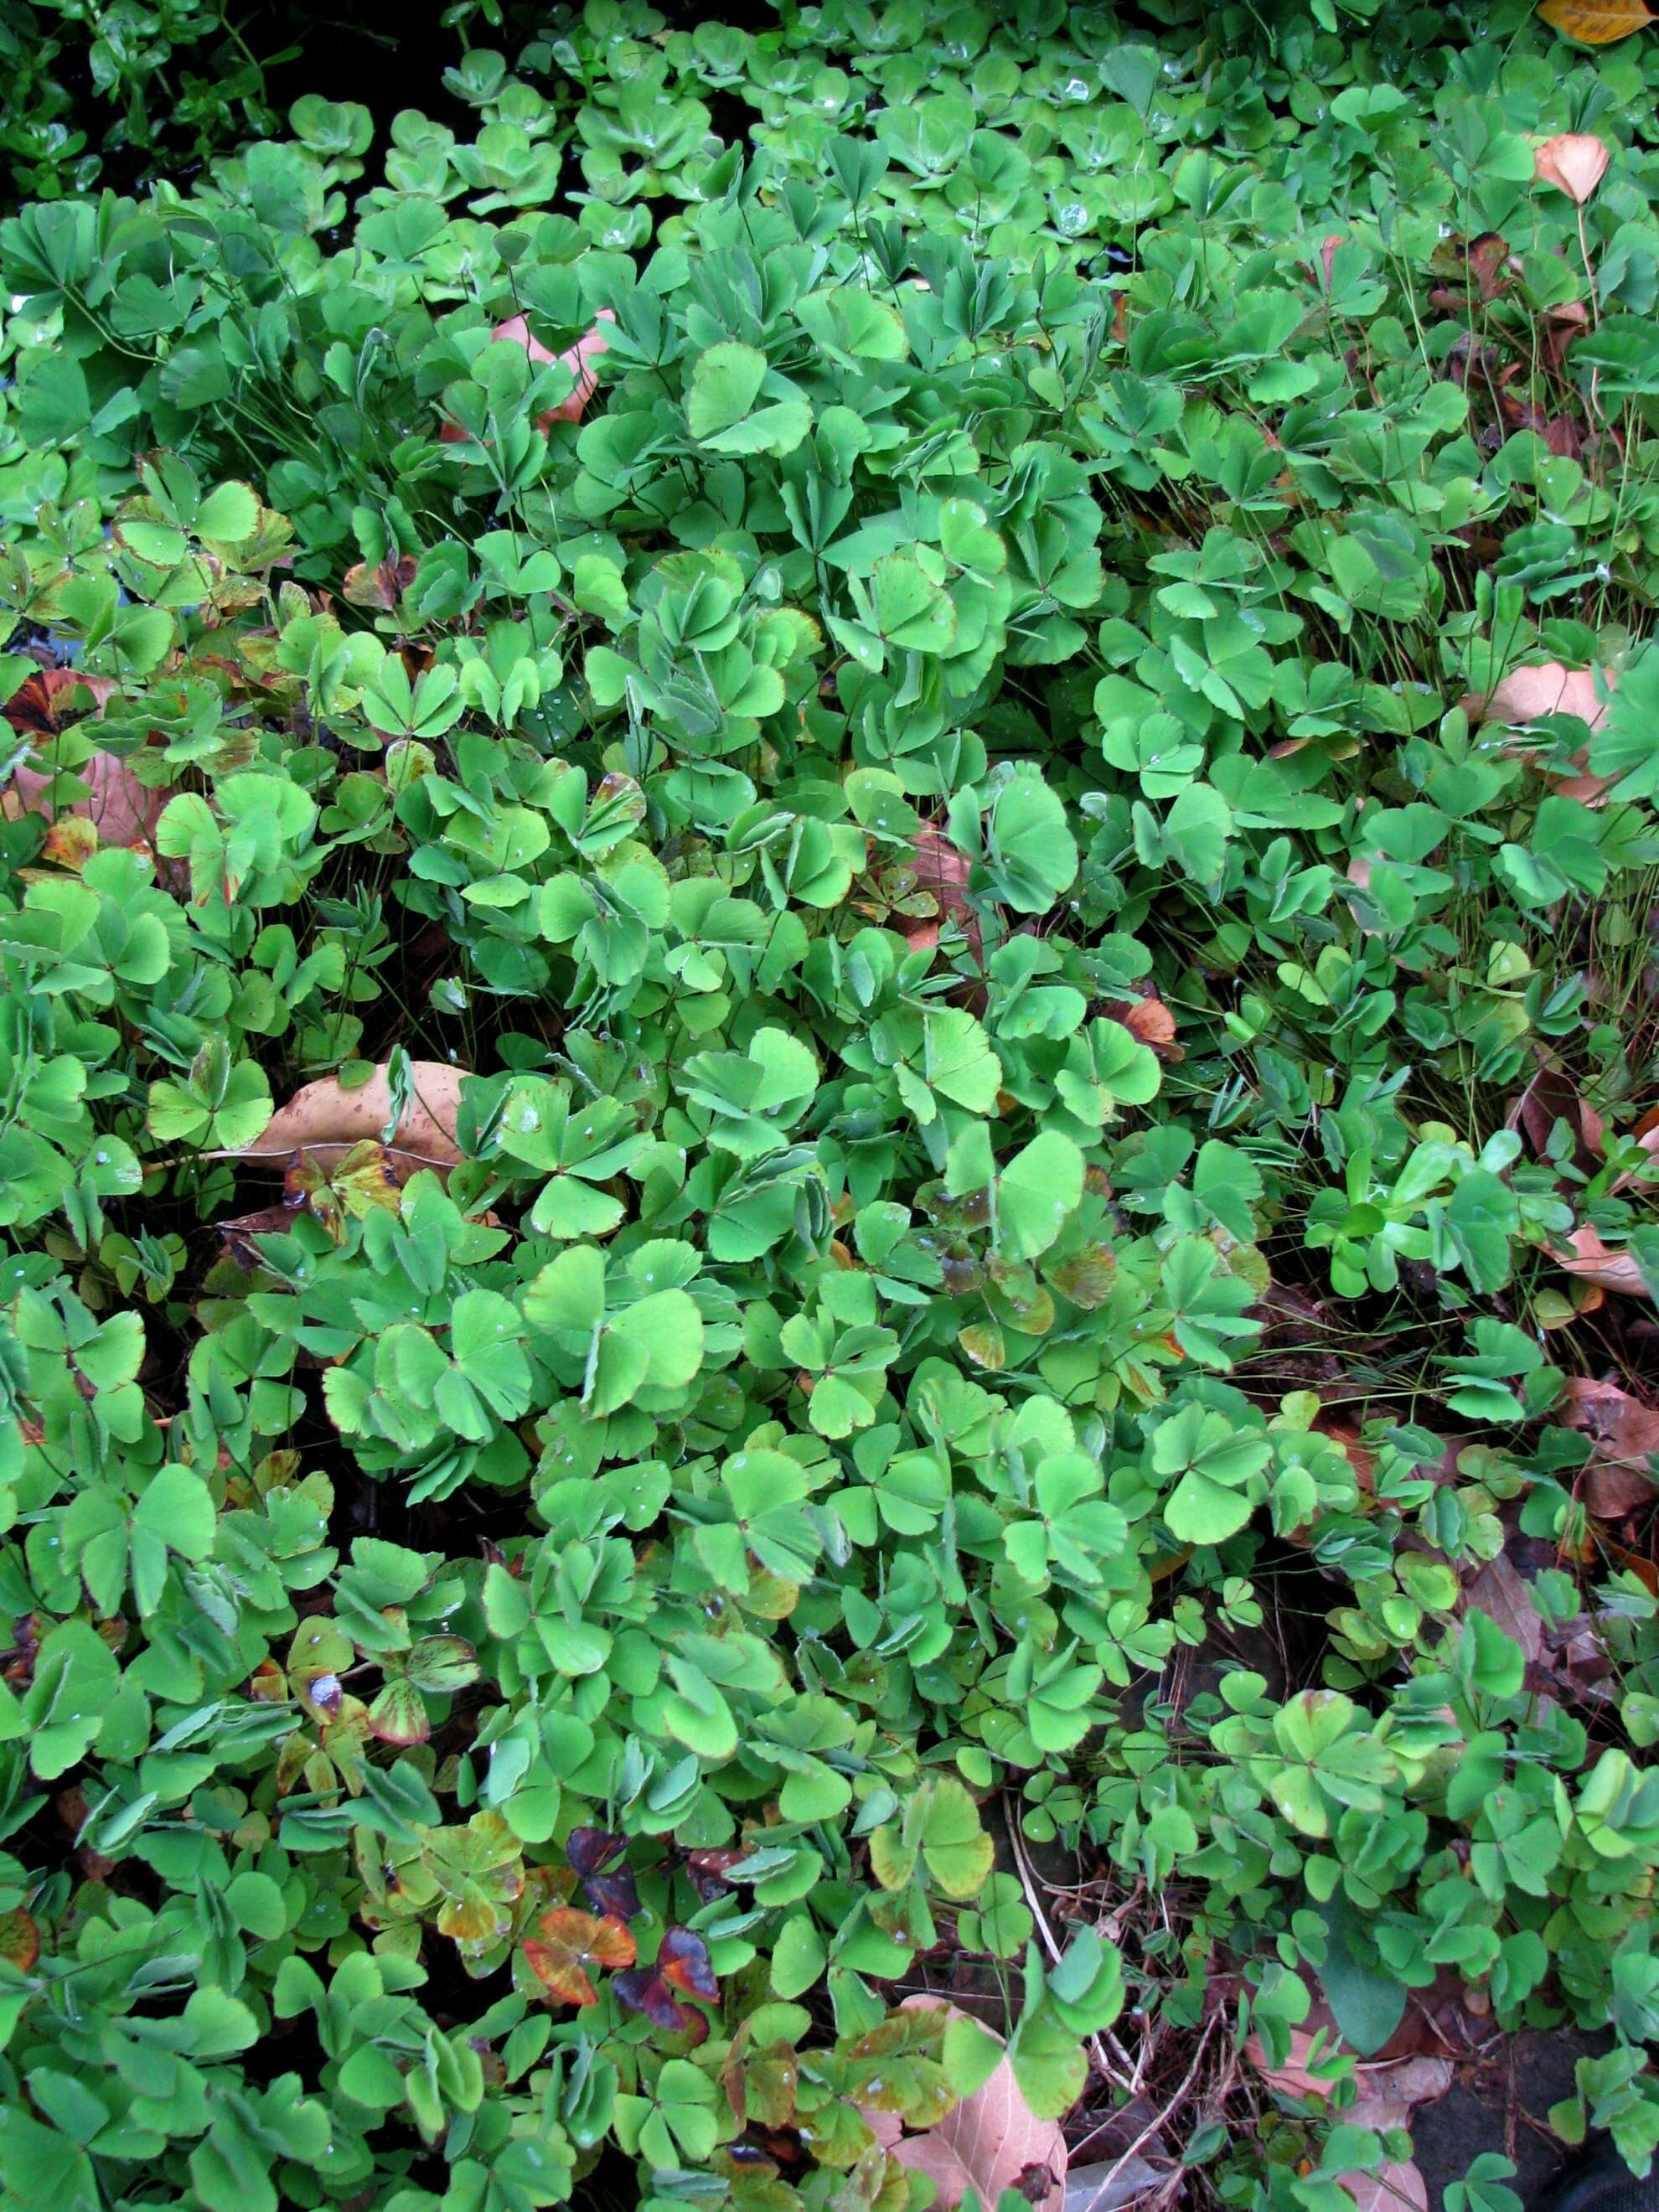 Image of waterclover